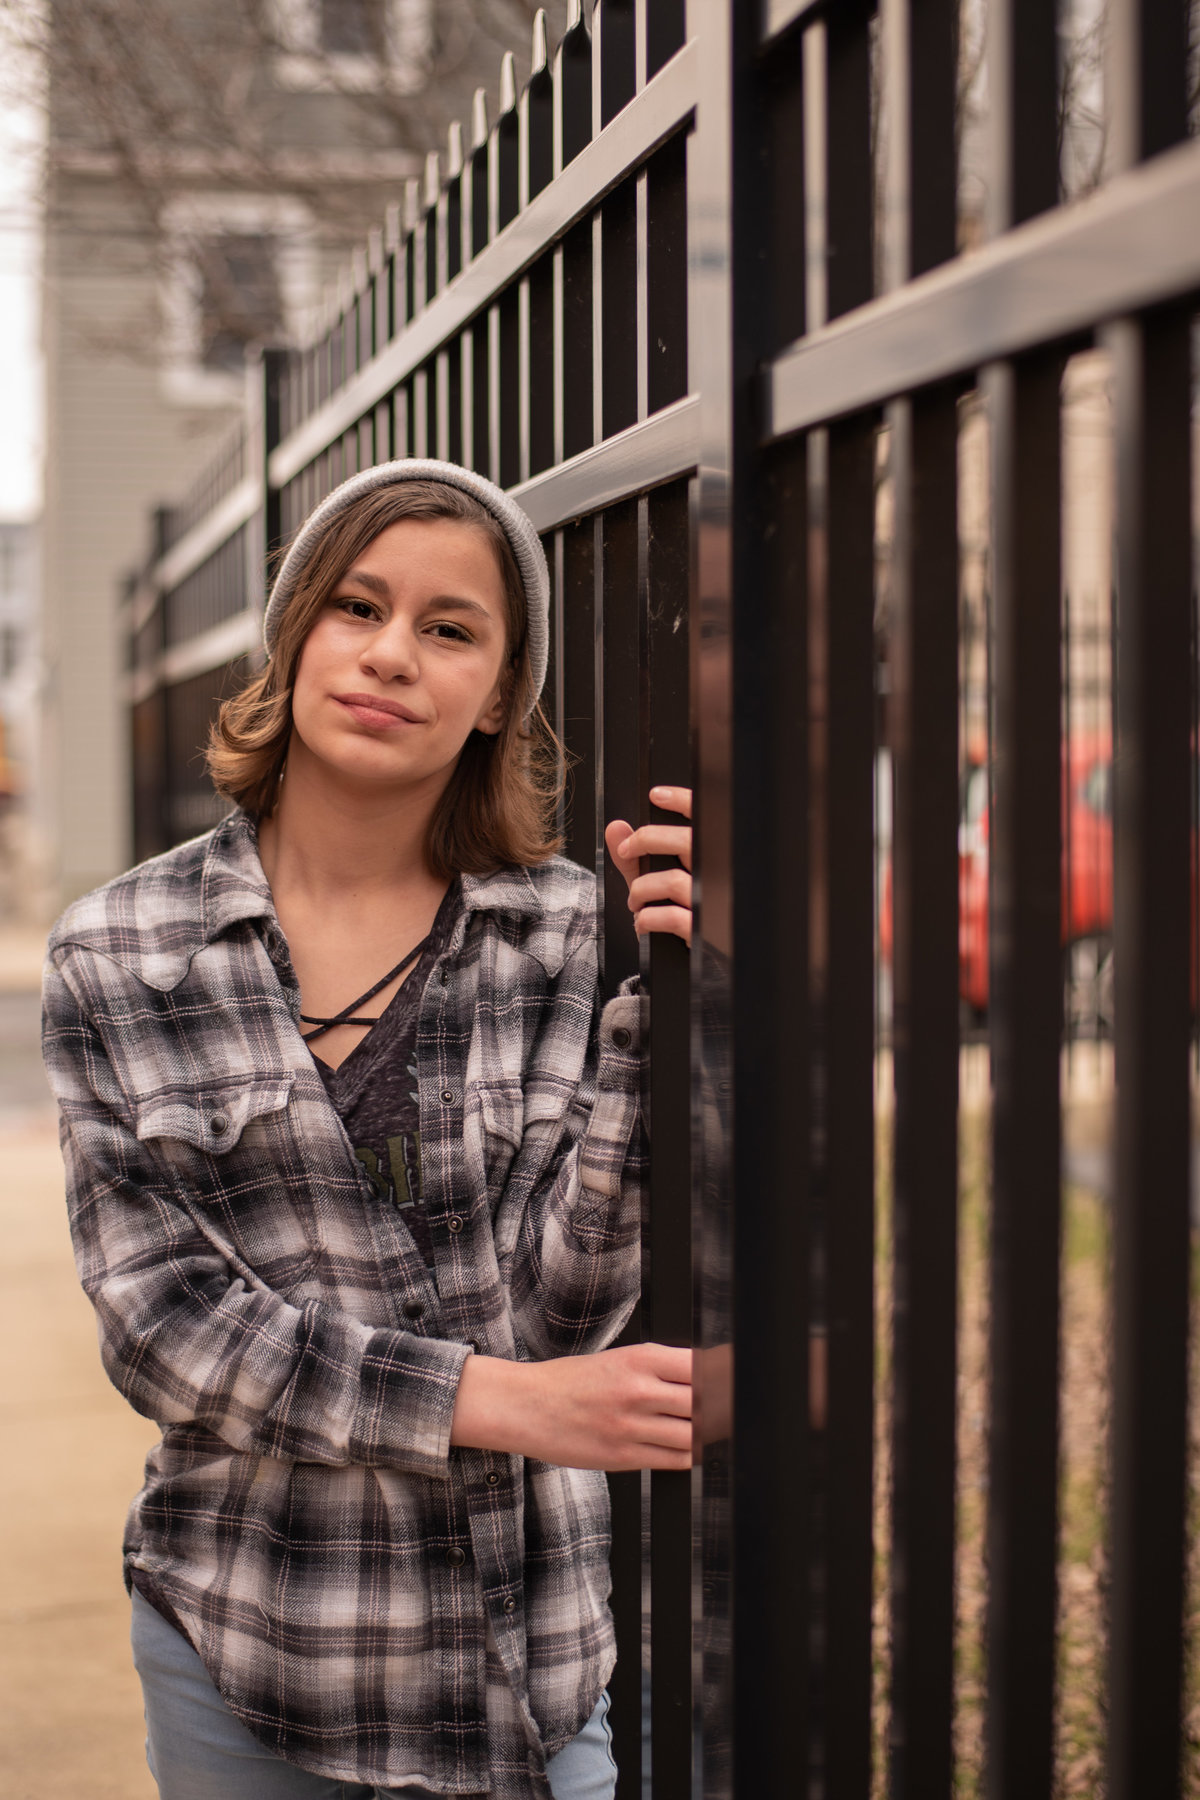 Teen Girl in gray flannel shirt and cap posed along black metal fence